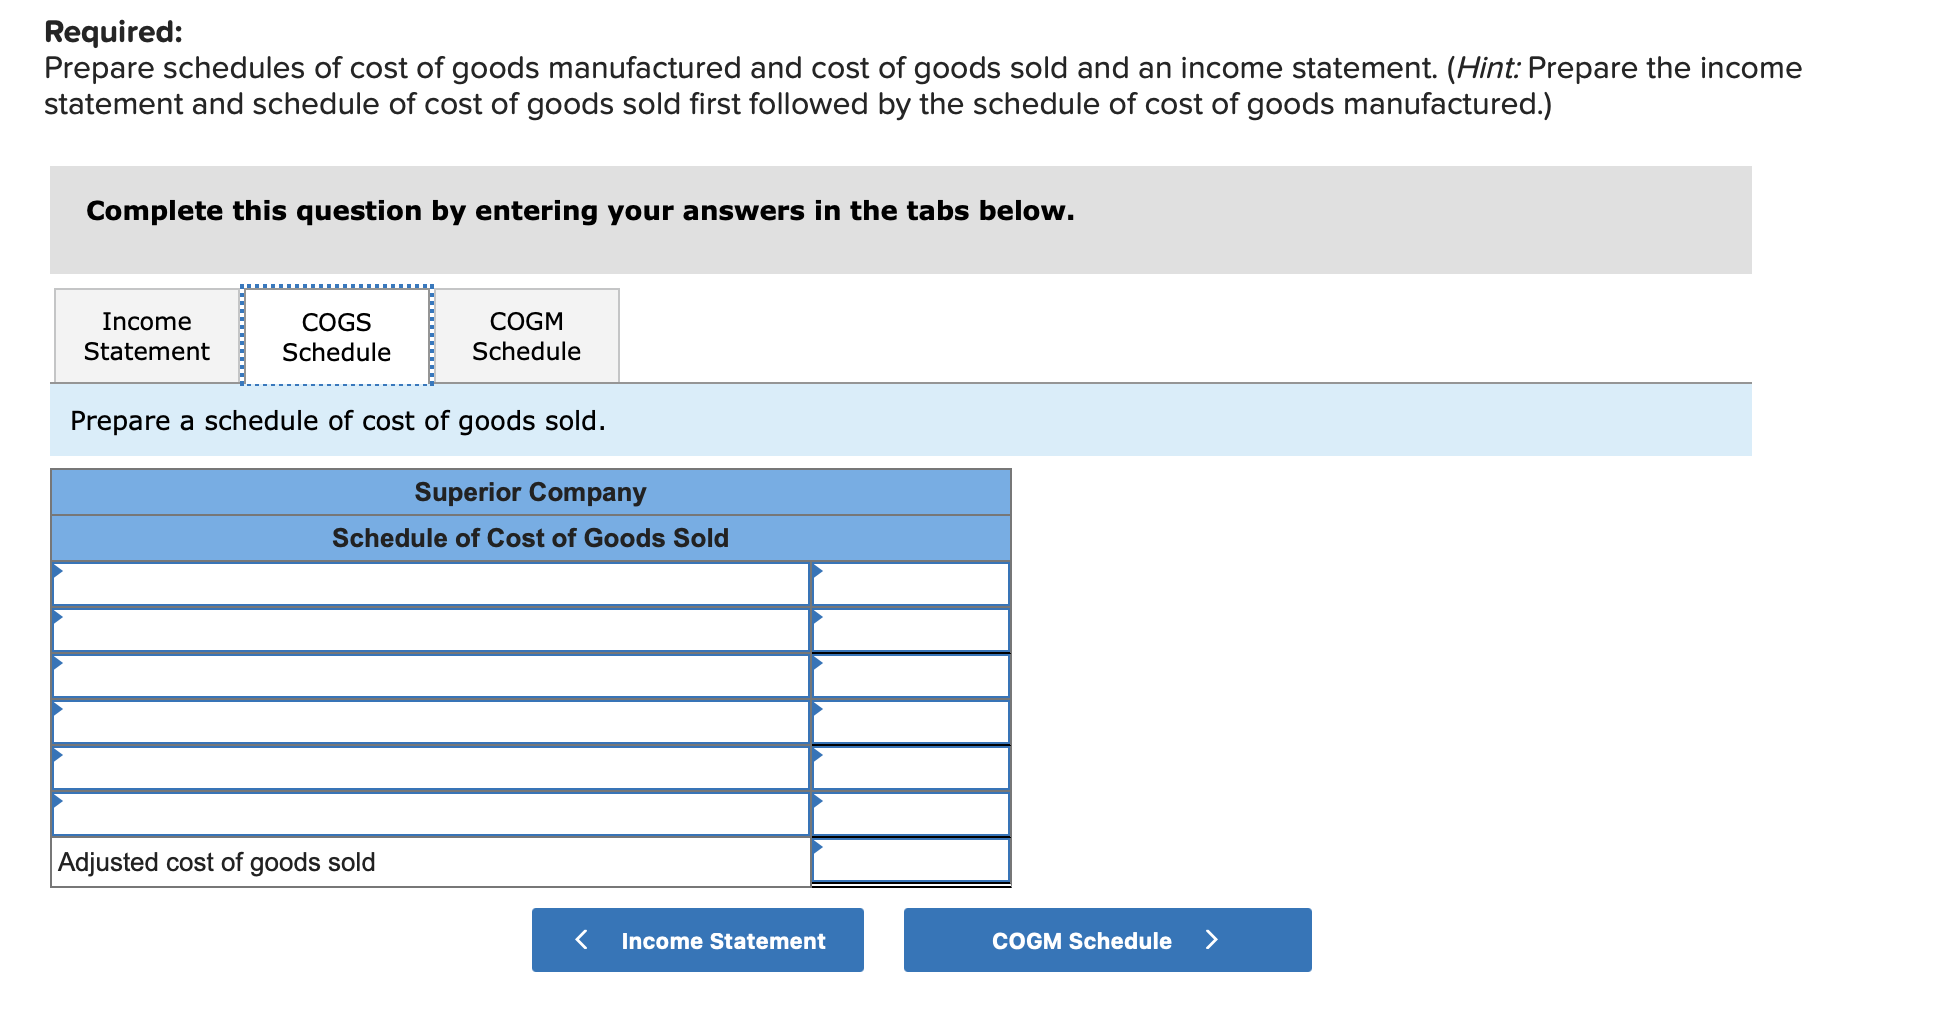 Required: Prepare schedules of cost of goods manufactured and cost of goods sold and an income statement.